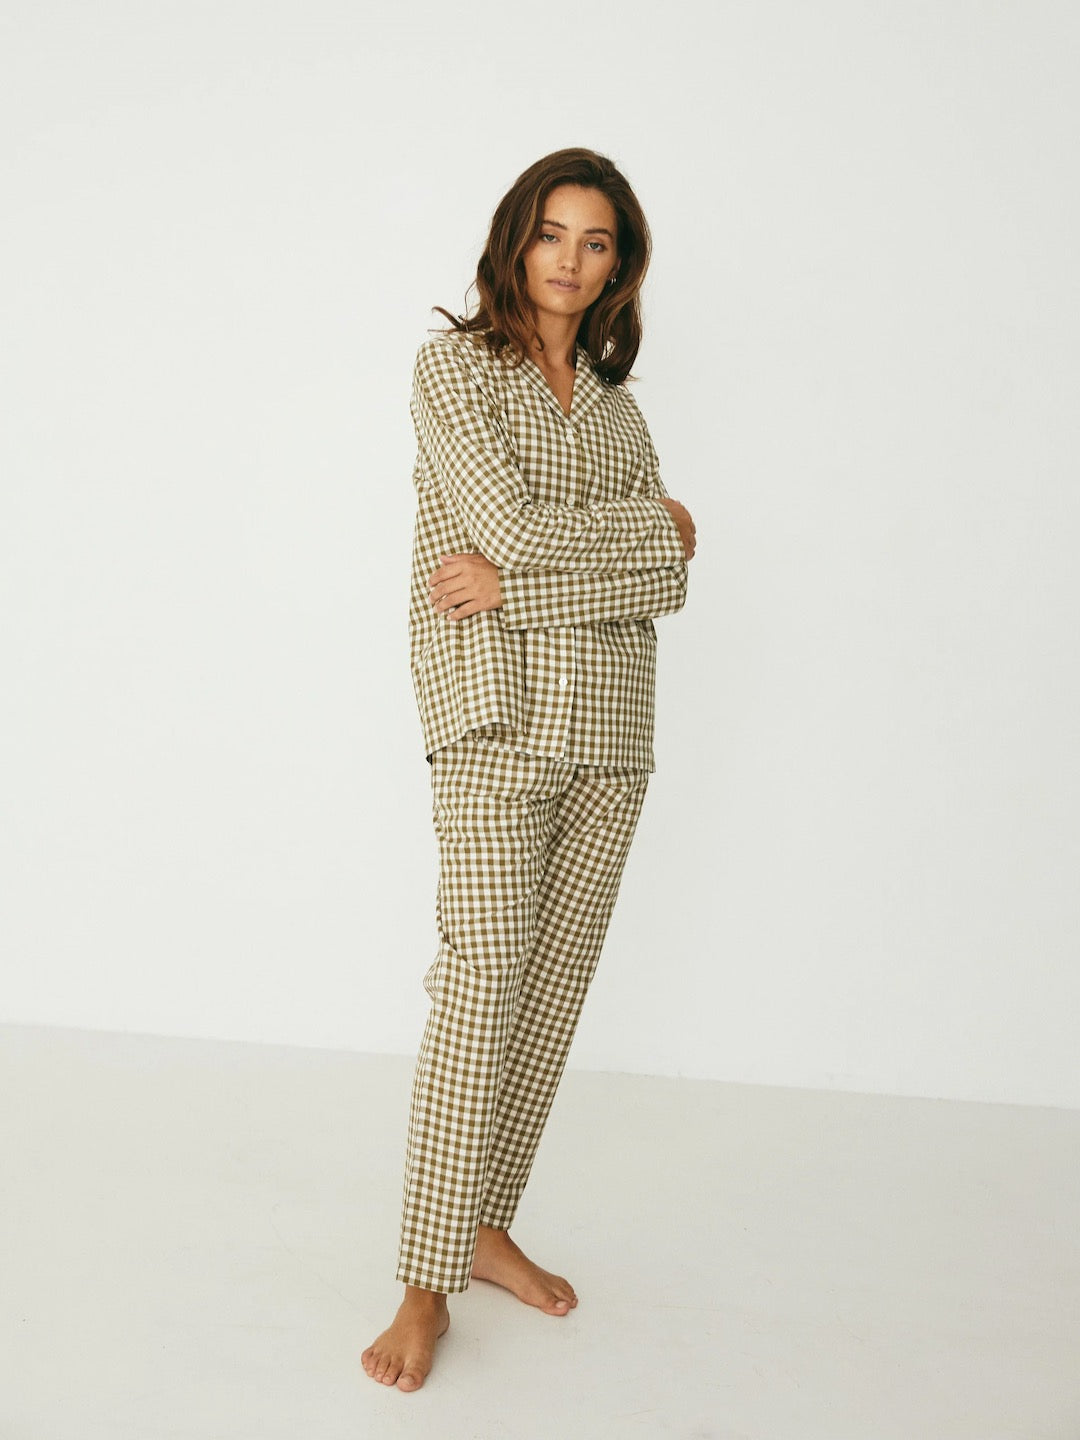 The model is wearing a Classic Set – Olive Gingham pajama set by general sleep.